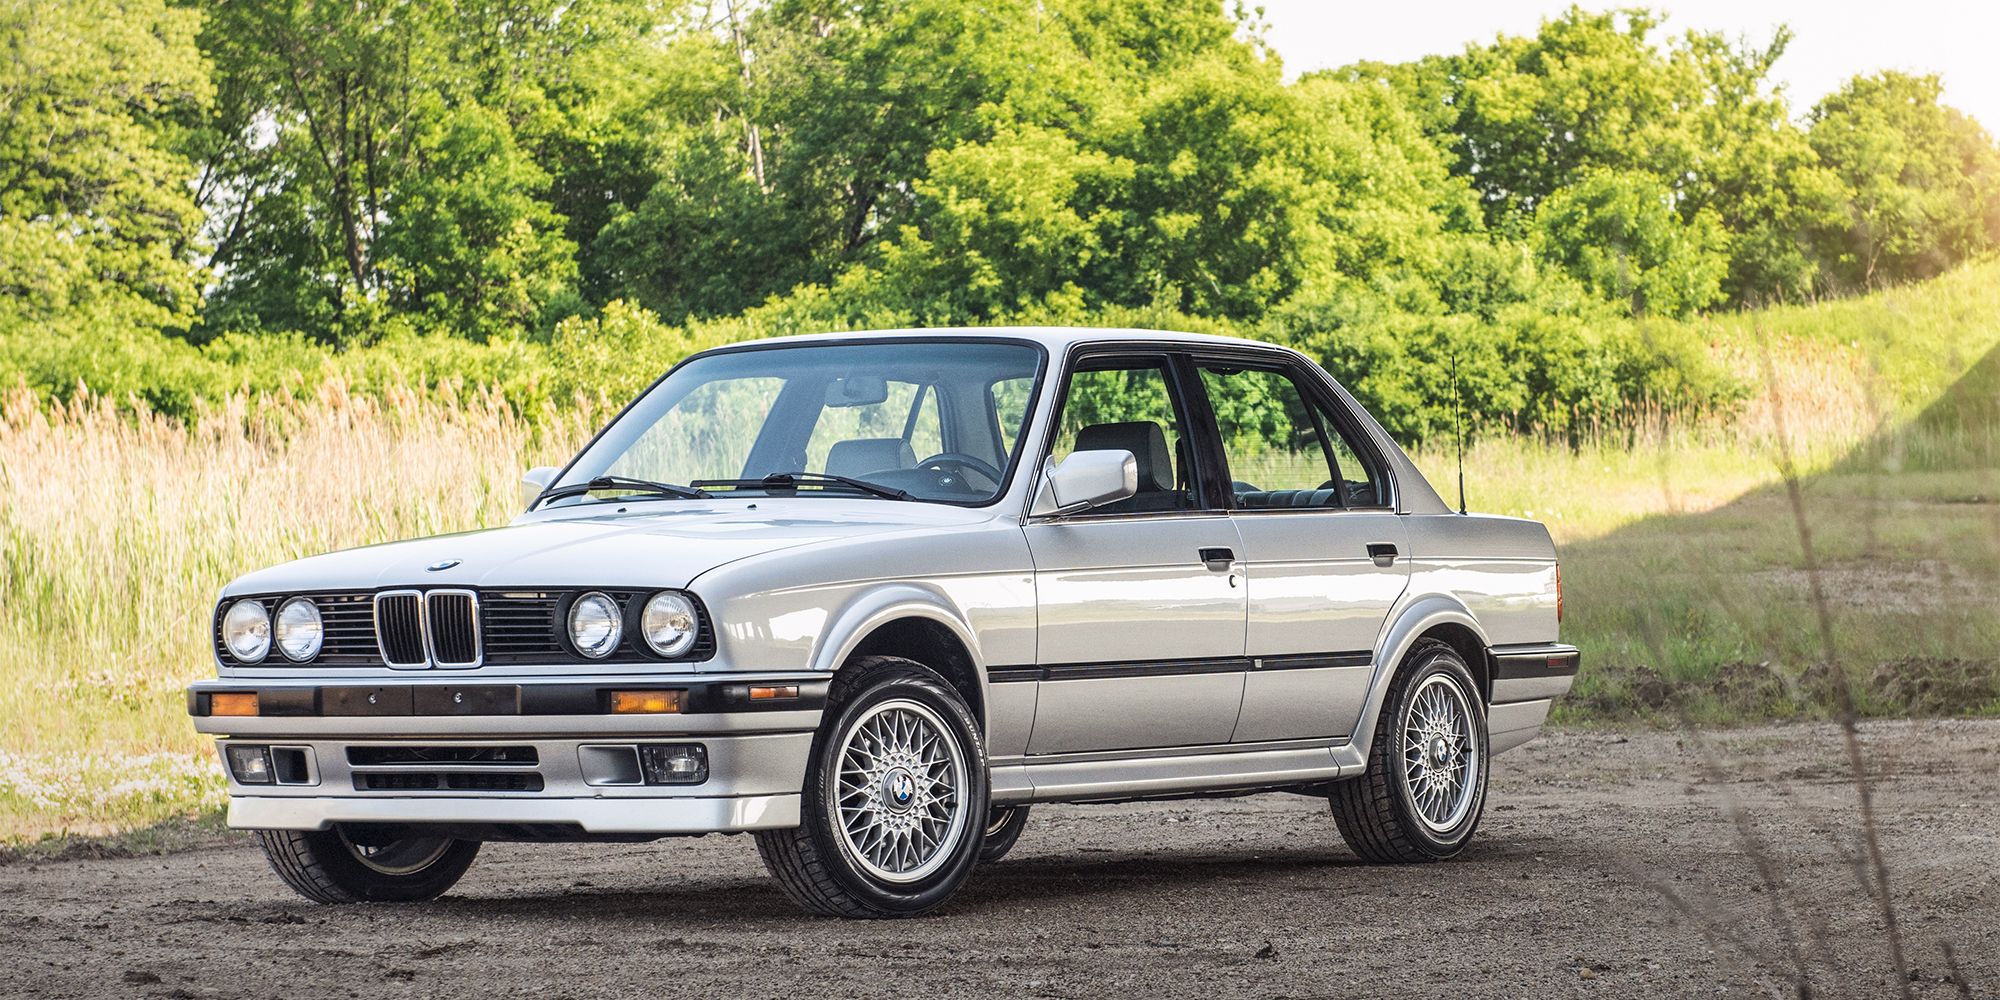 How to modify a classic BMW E30: Find out how he did it